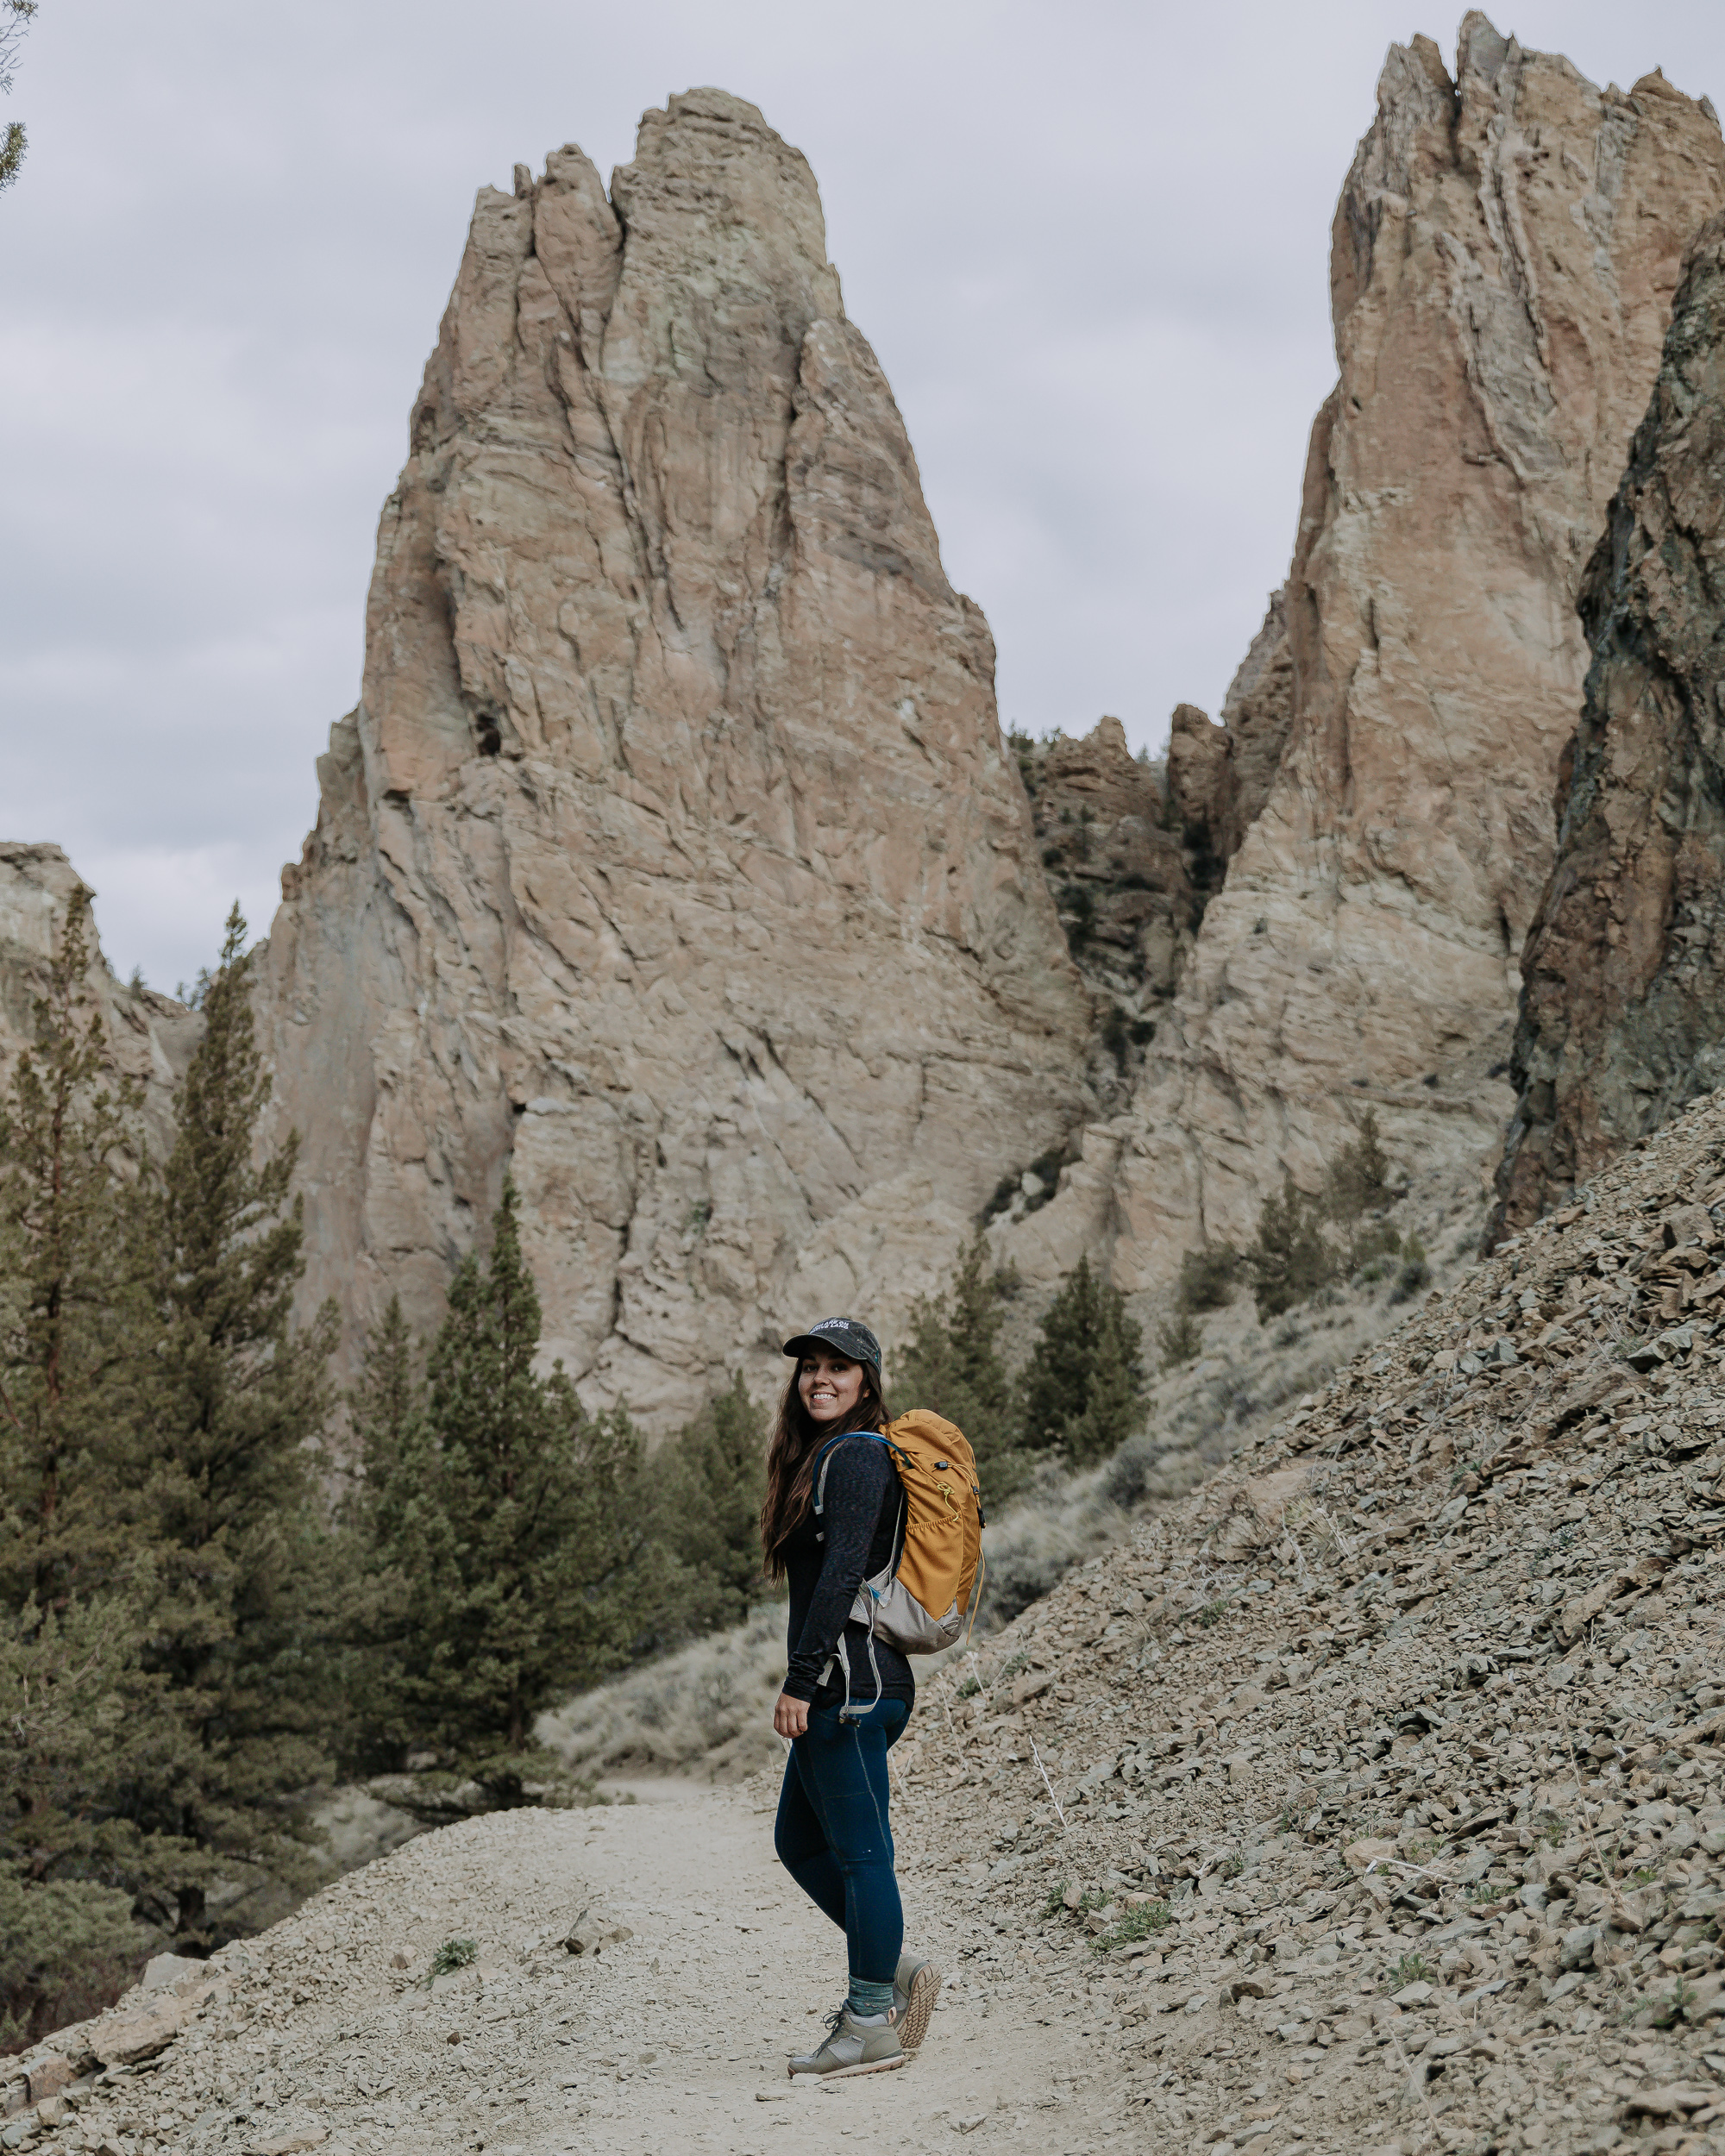 Lindsay Kagalis hiking in the Women's Bozeman Mid shoes surrounded by cool rock formations